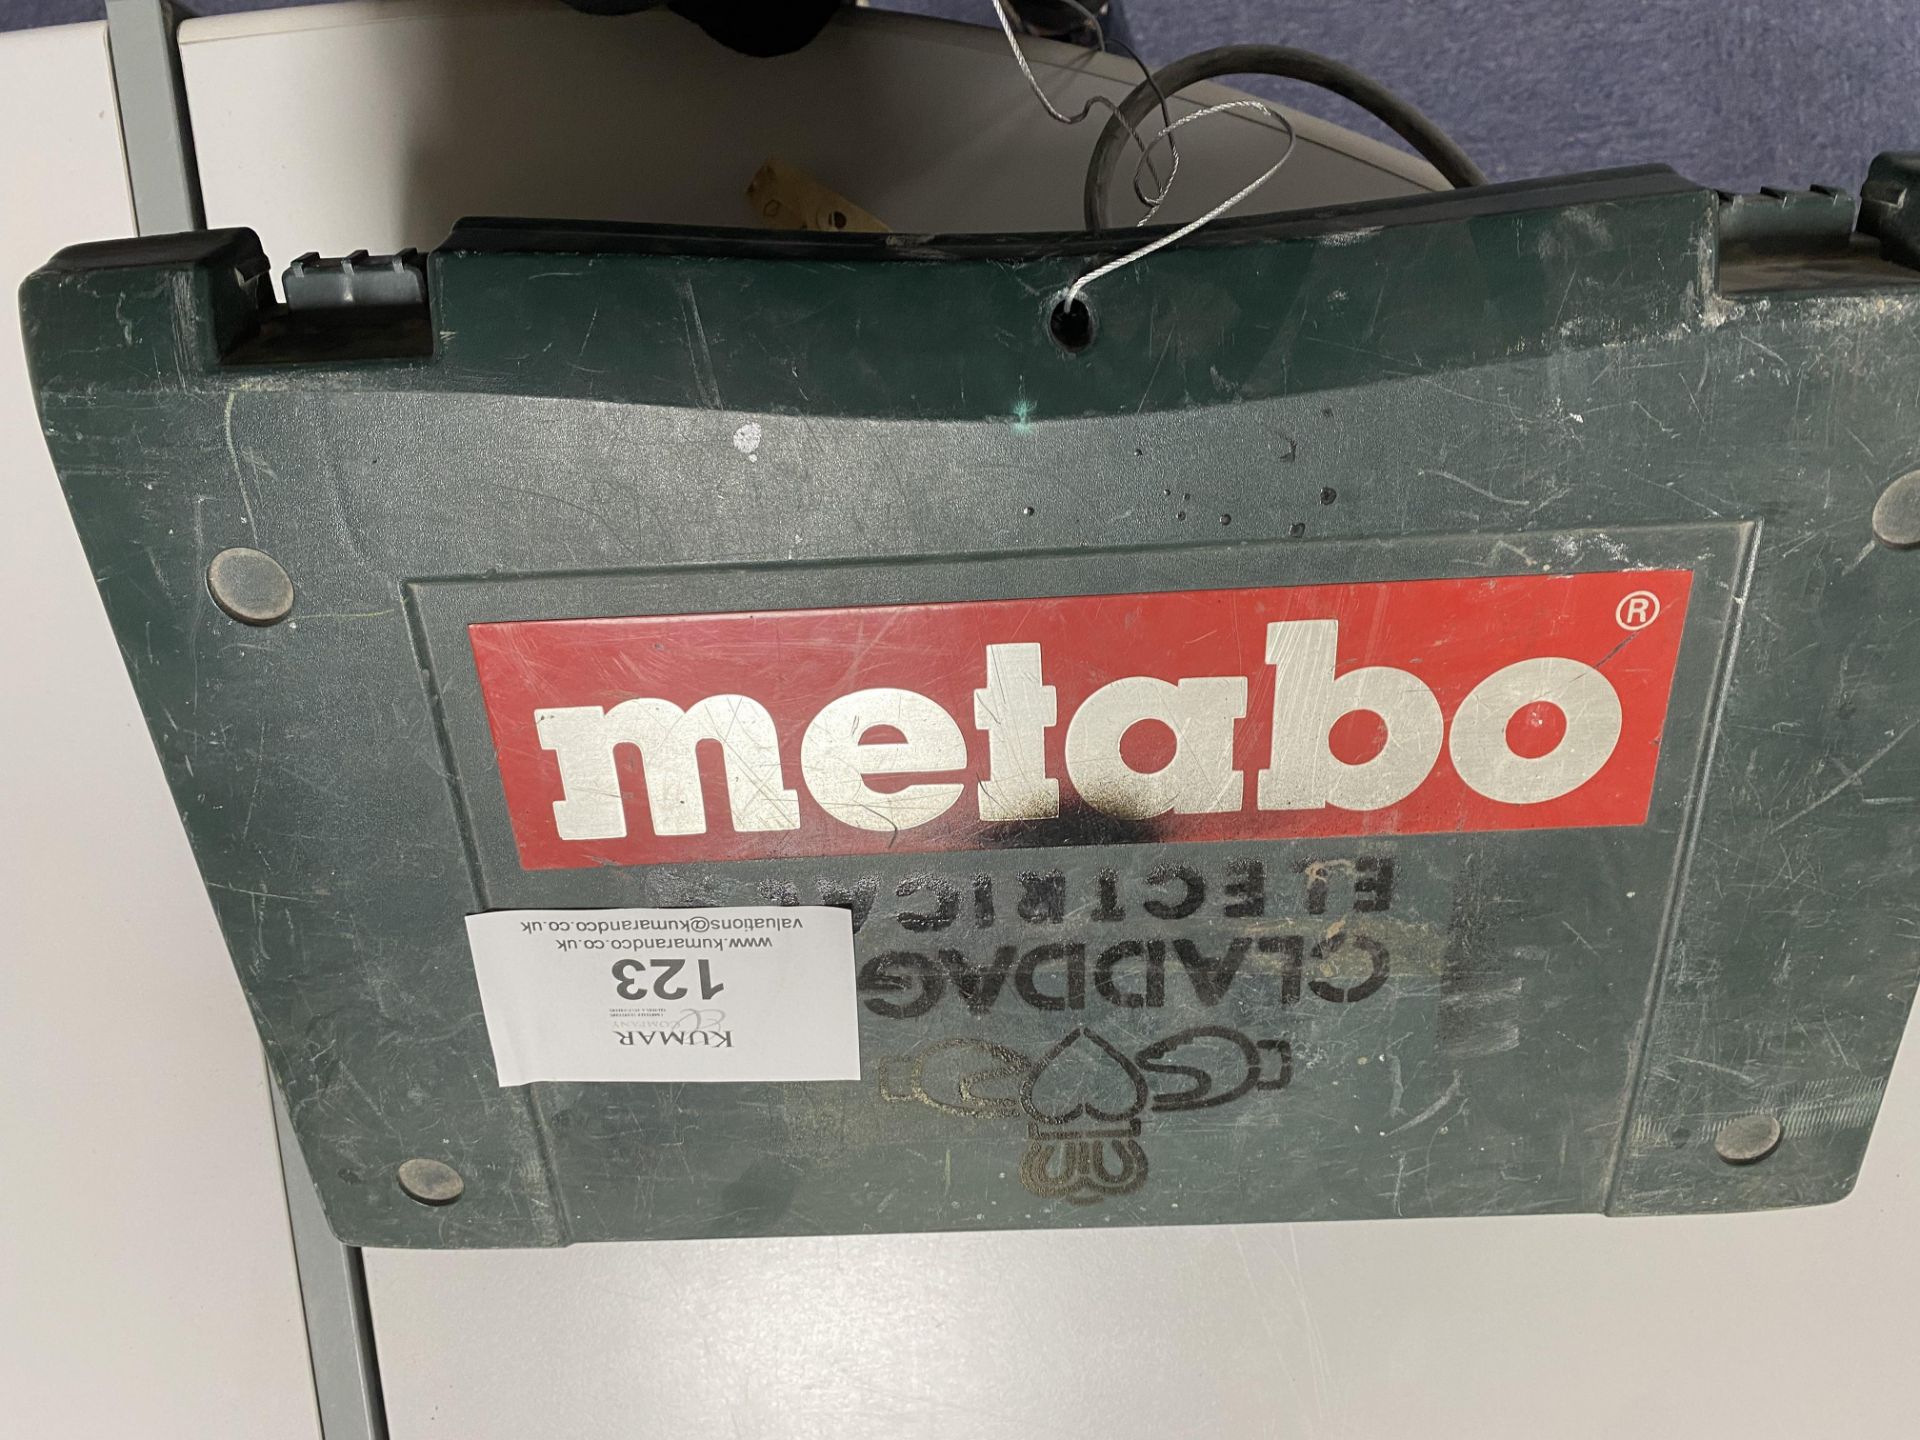 Metabo BHE24 110V Rotary Hammer Drill with Carry Case, Serial No. 00243390 - Image 6 of 7